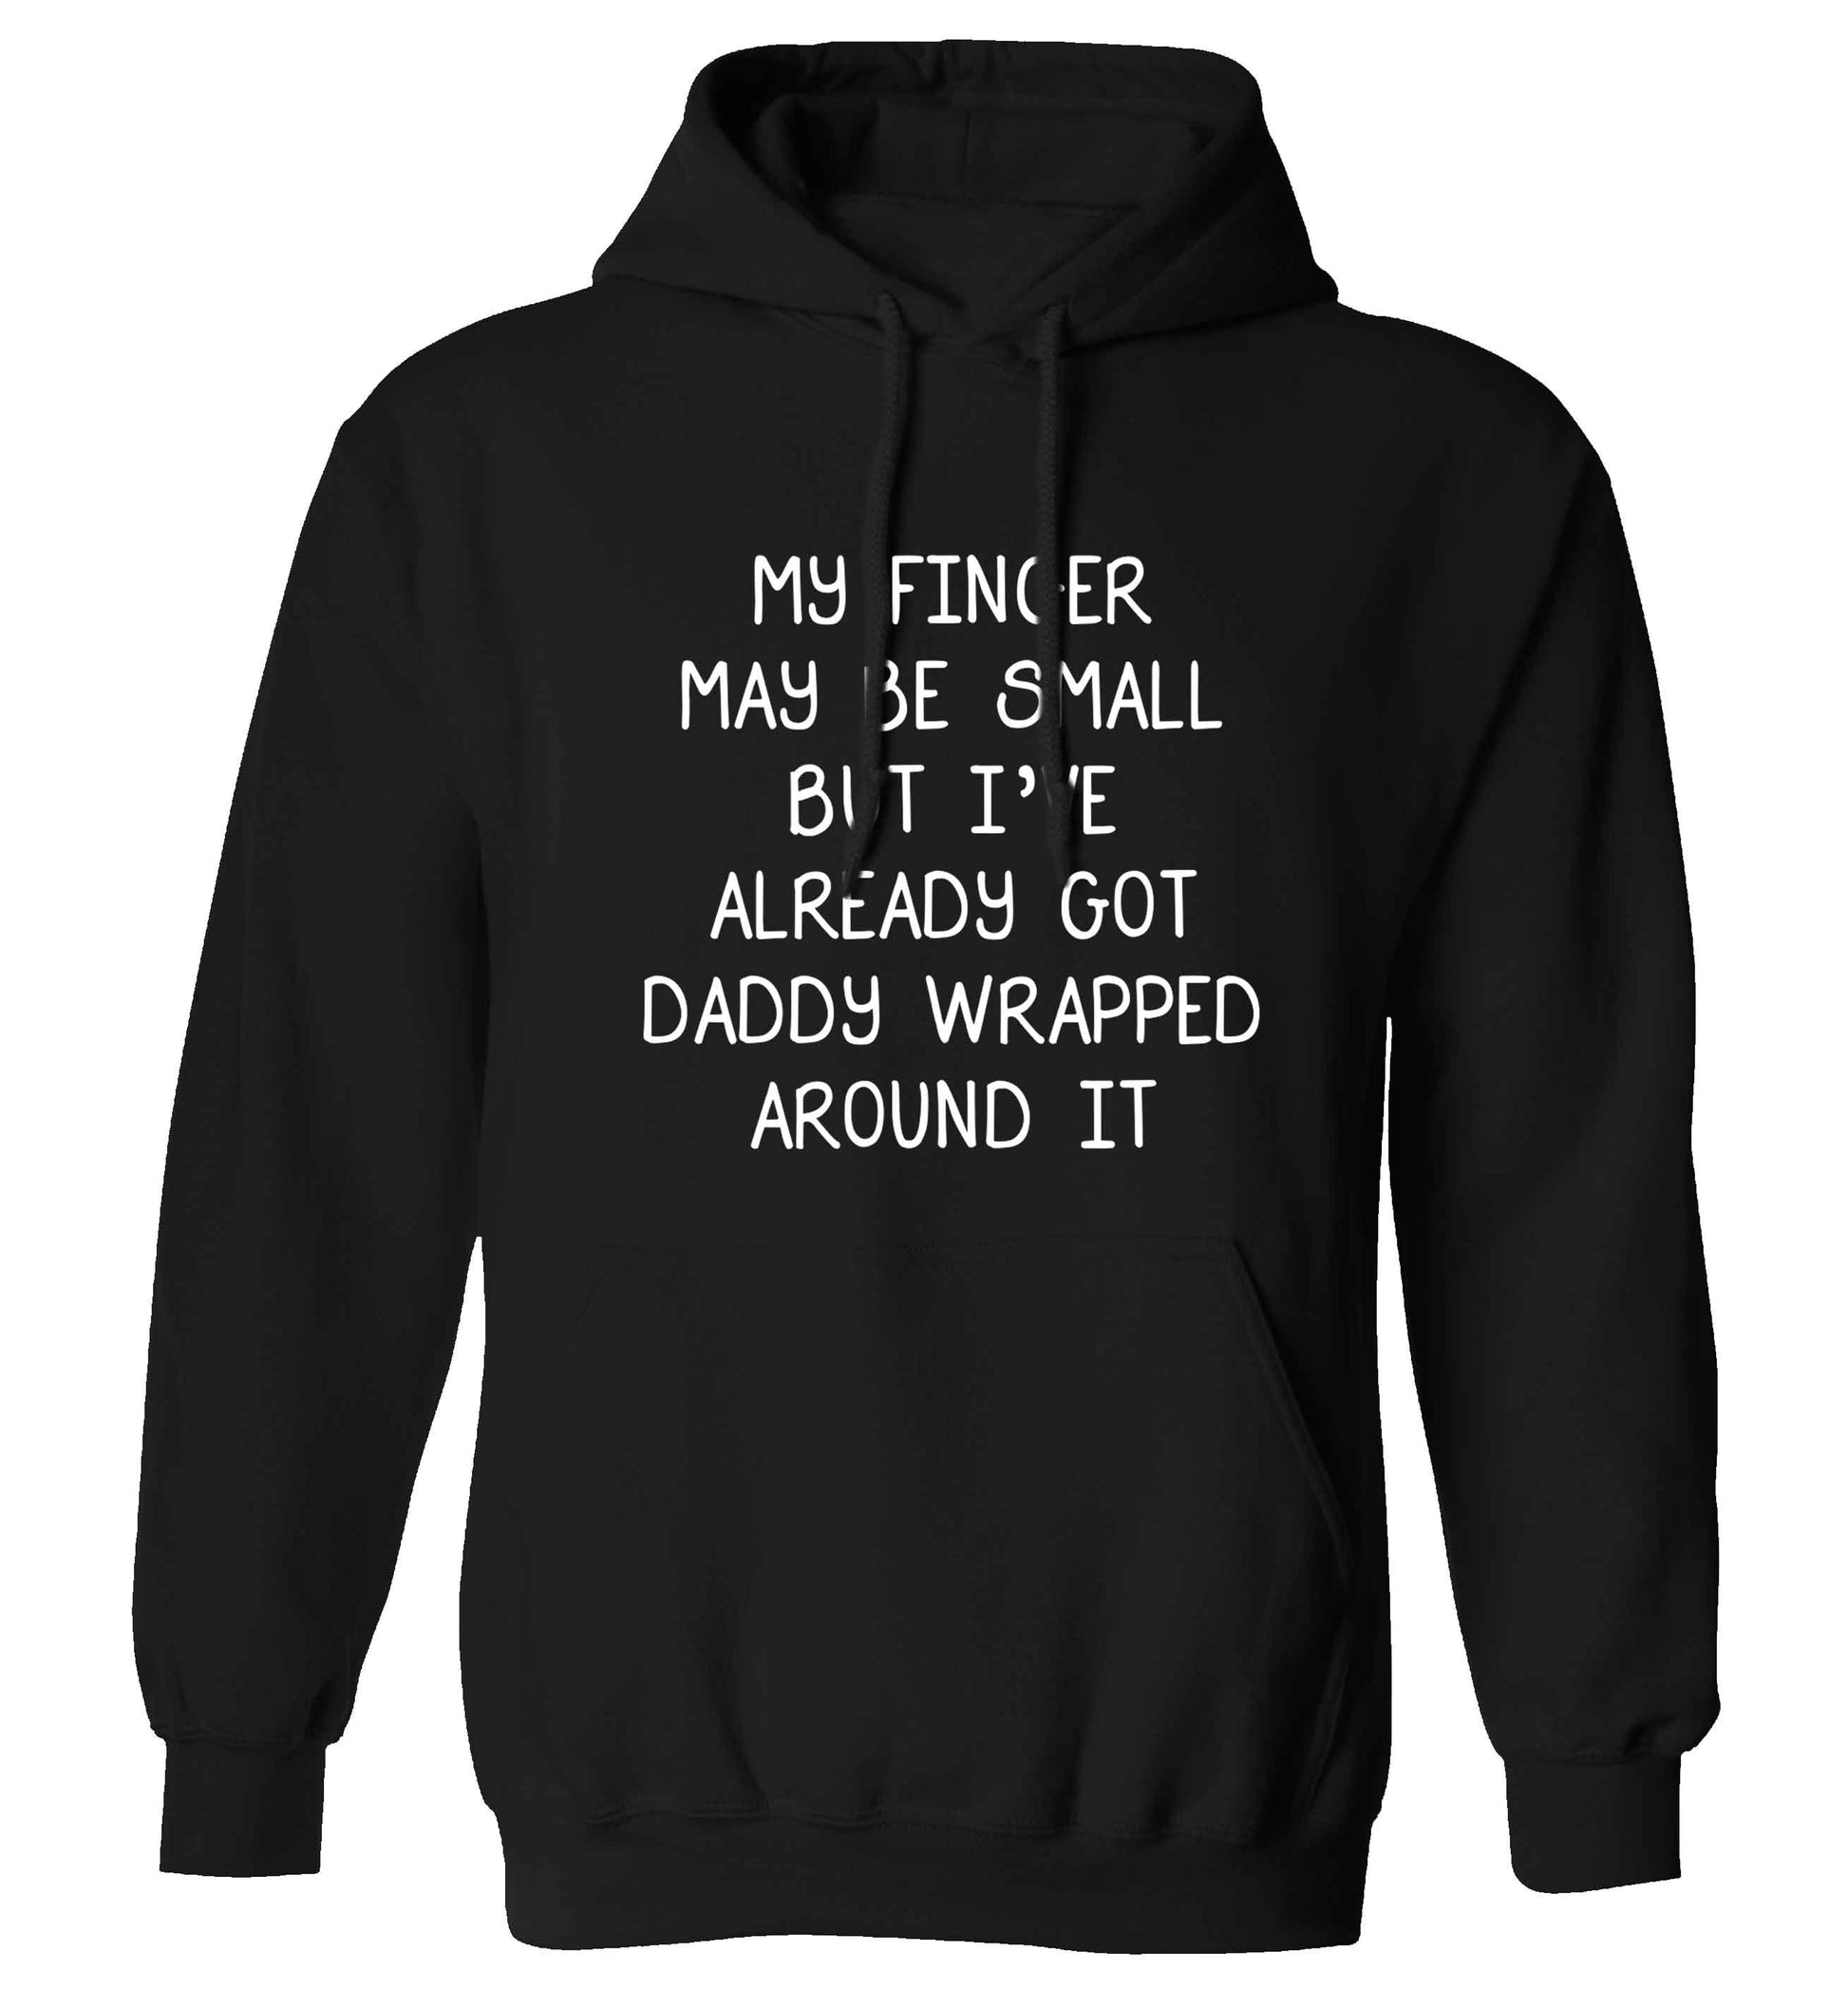 My finger may be small but I've already got daddy wrapped around it adults unisex black hoodie 2XL